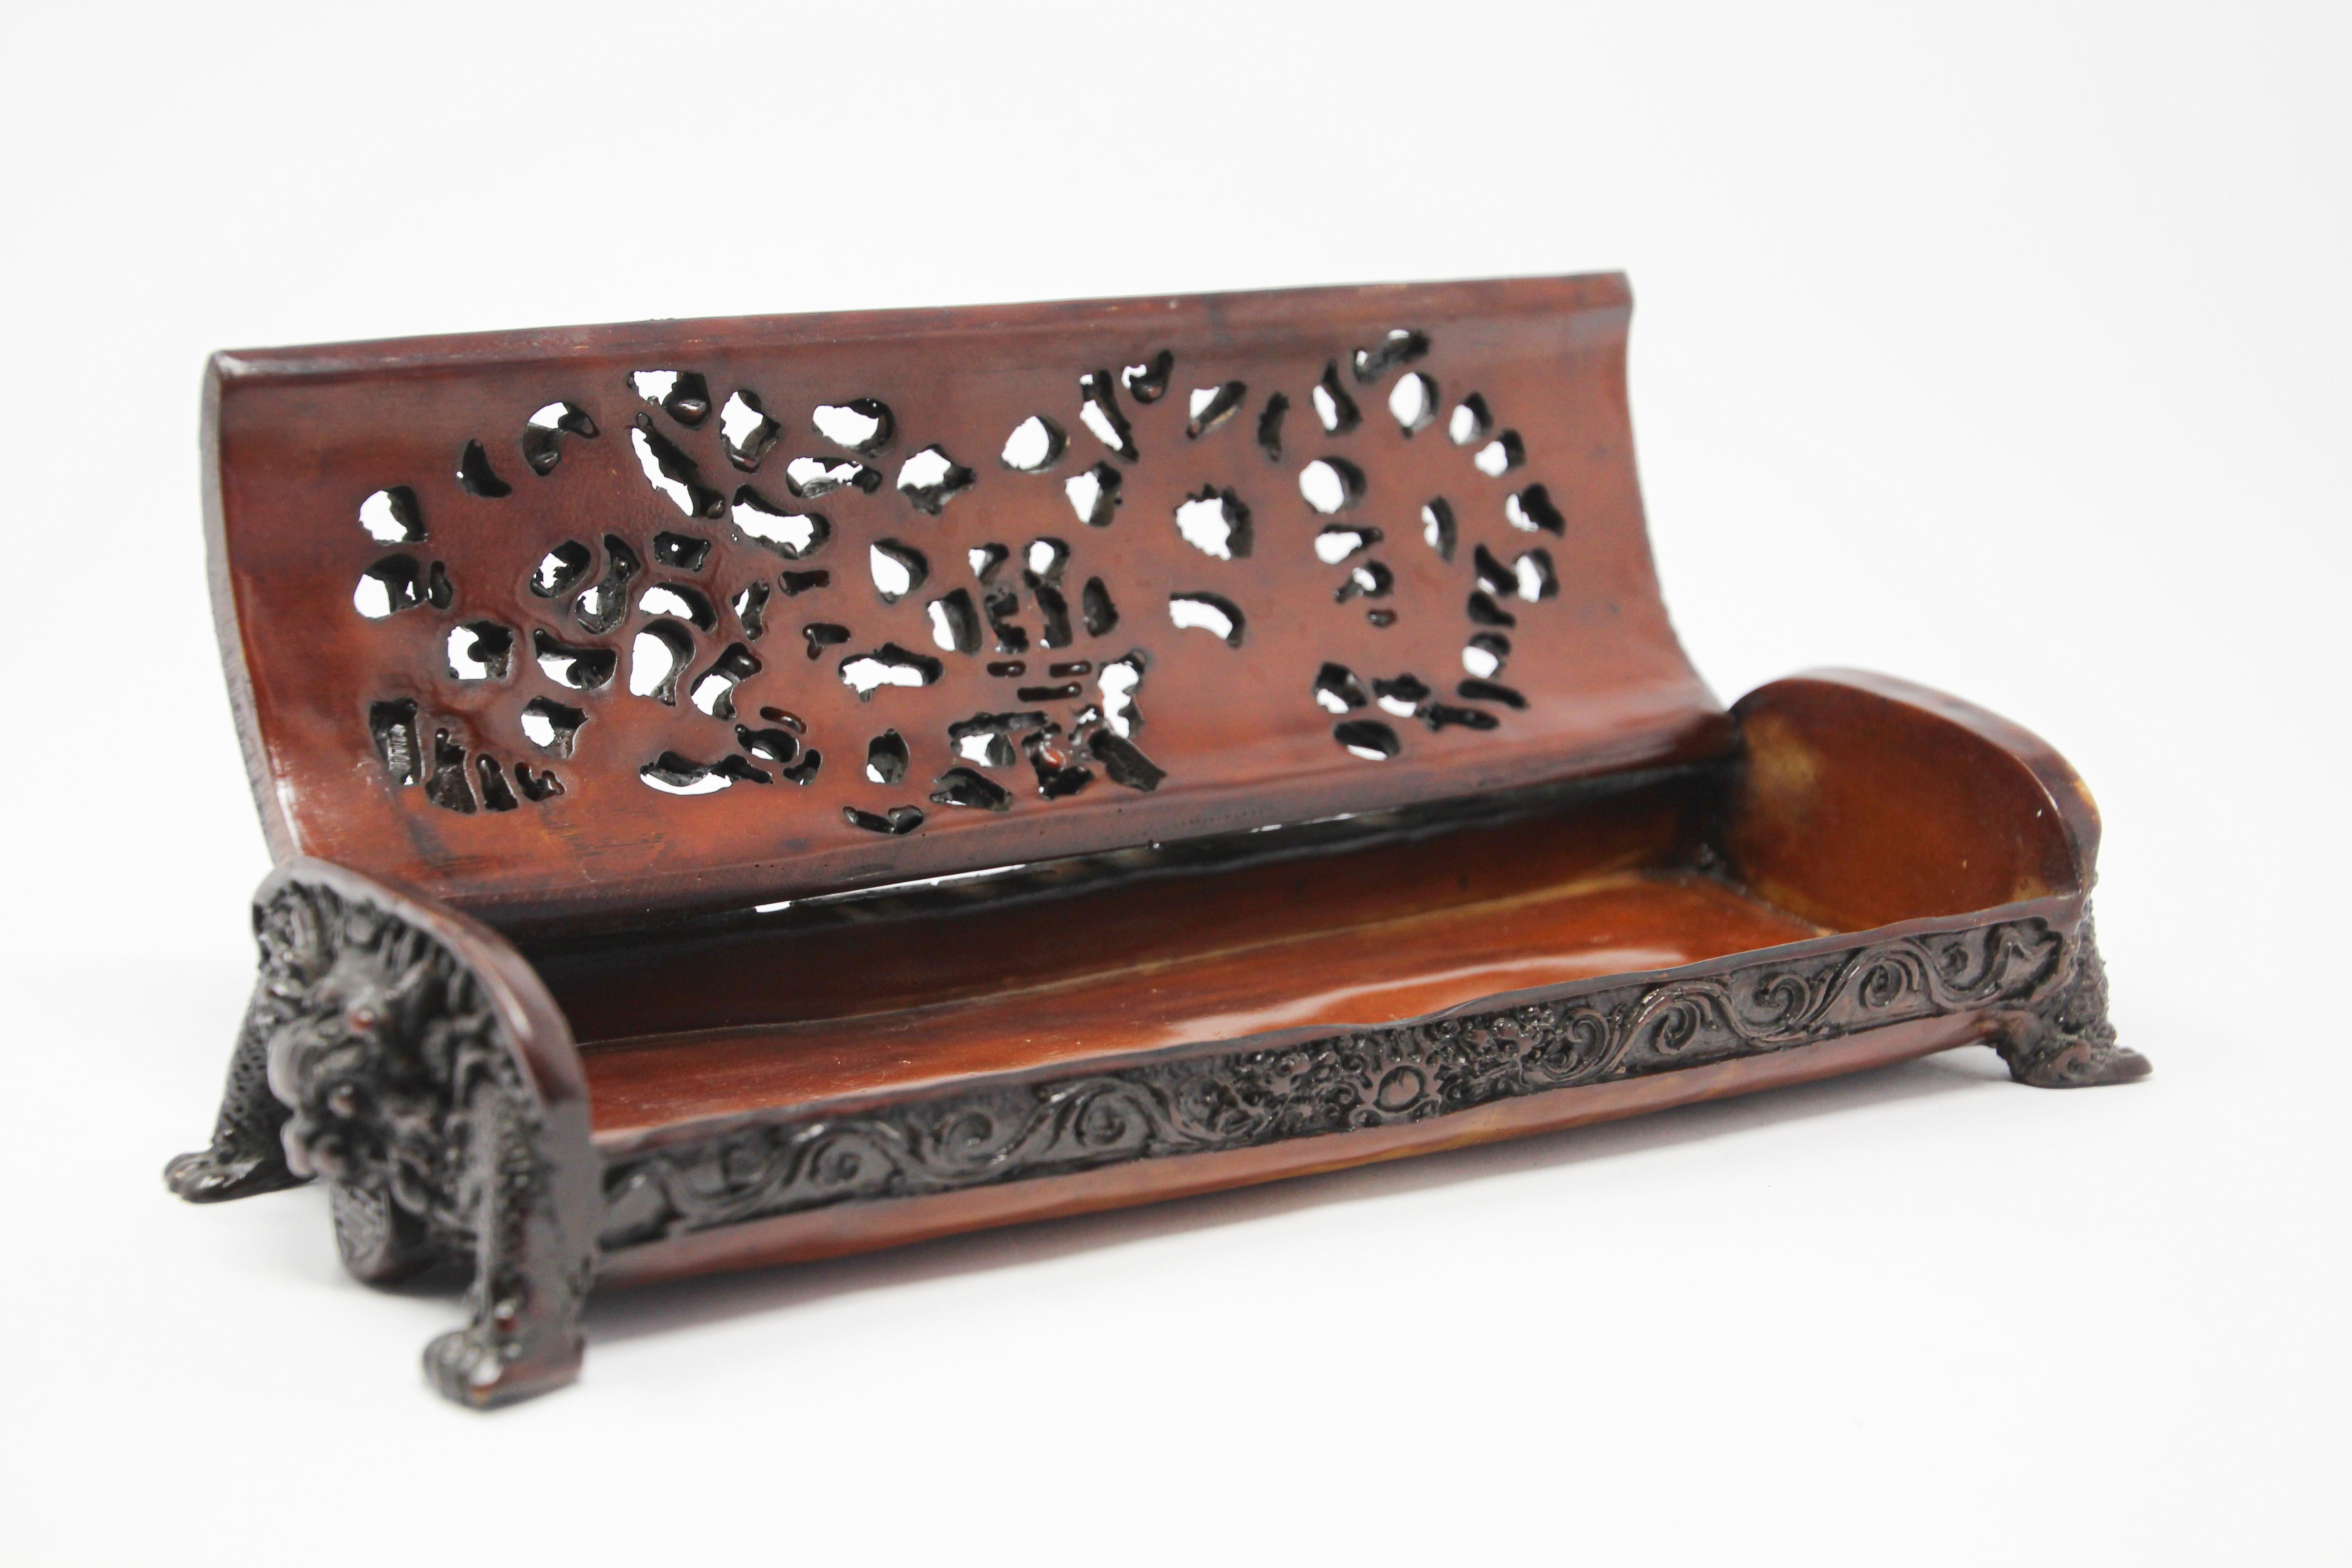 20th Century Chinese Footed Box with Dragon Motifs